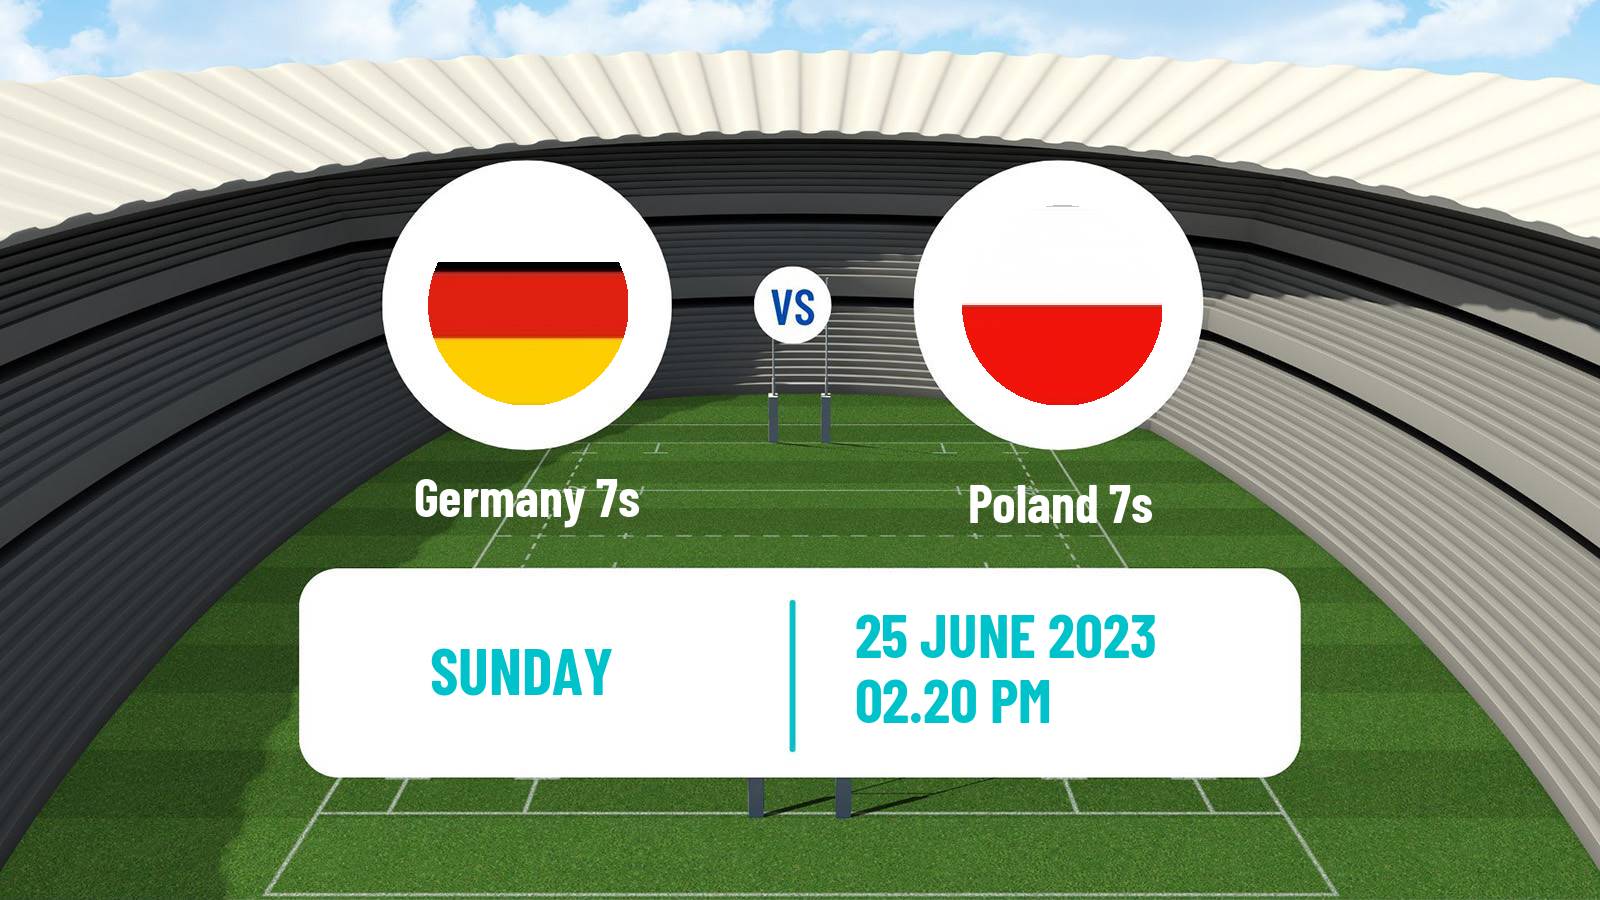 Rugby union European Games 7s Rugby Germany 7s - Poland 7s